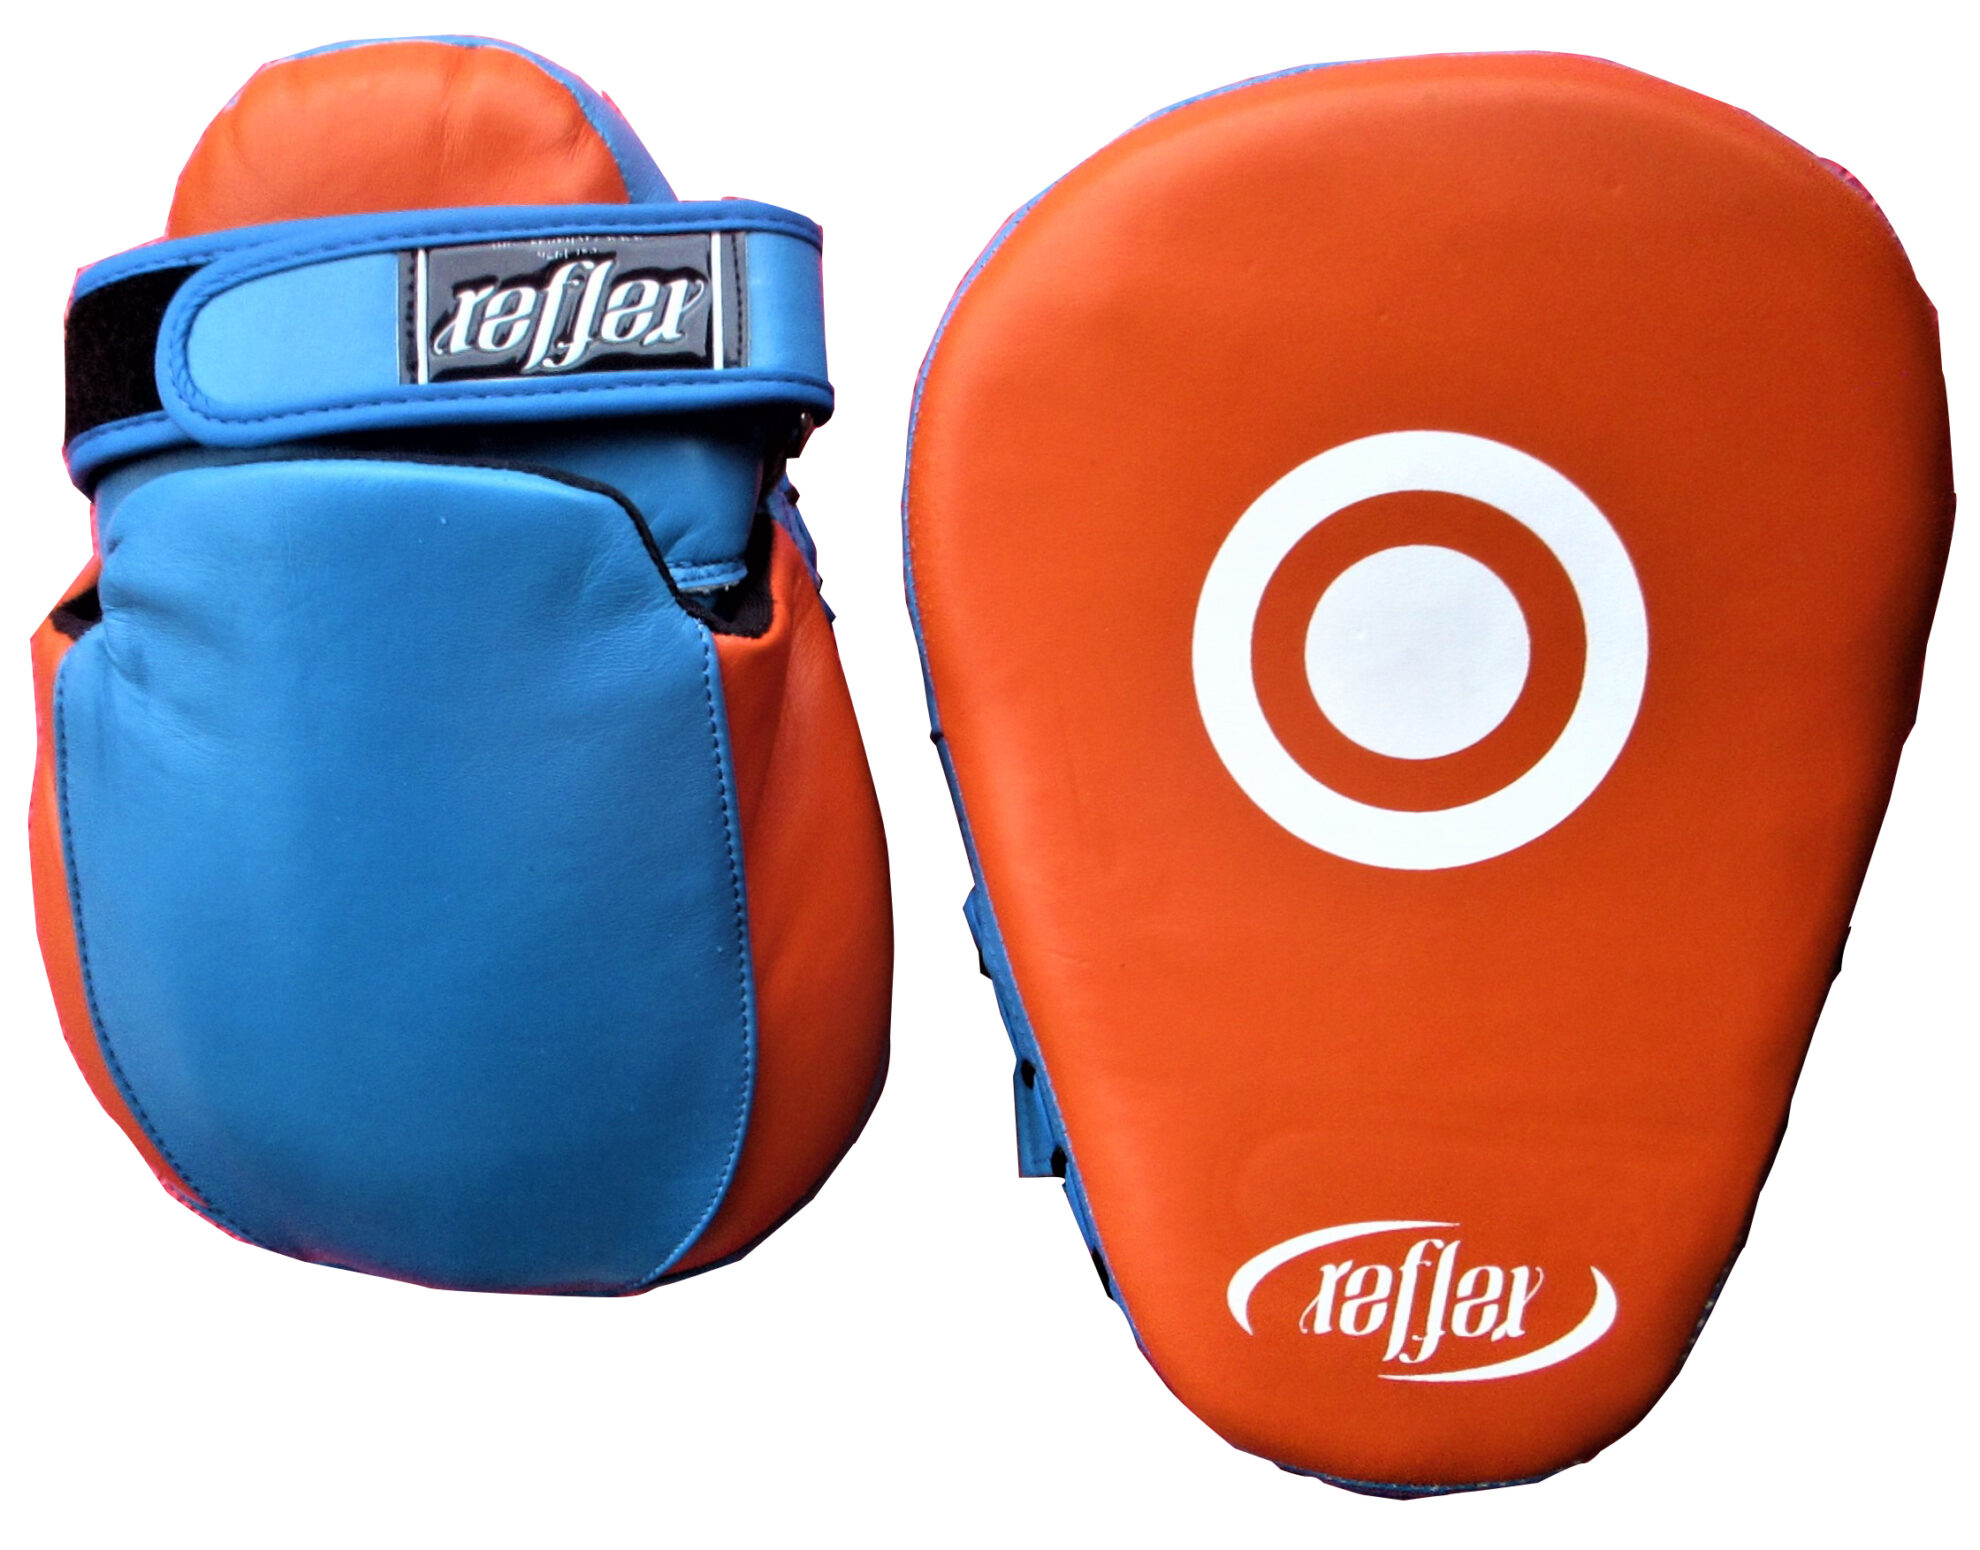 leather focus mitt with power dome for extra comfort and ergonomic shaping velcro closure unique feature padded back for face protection